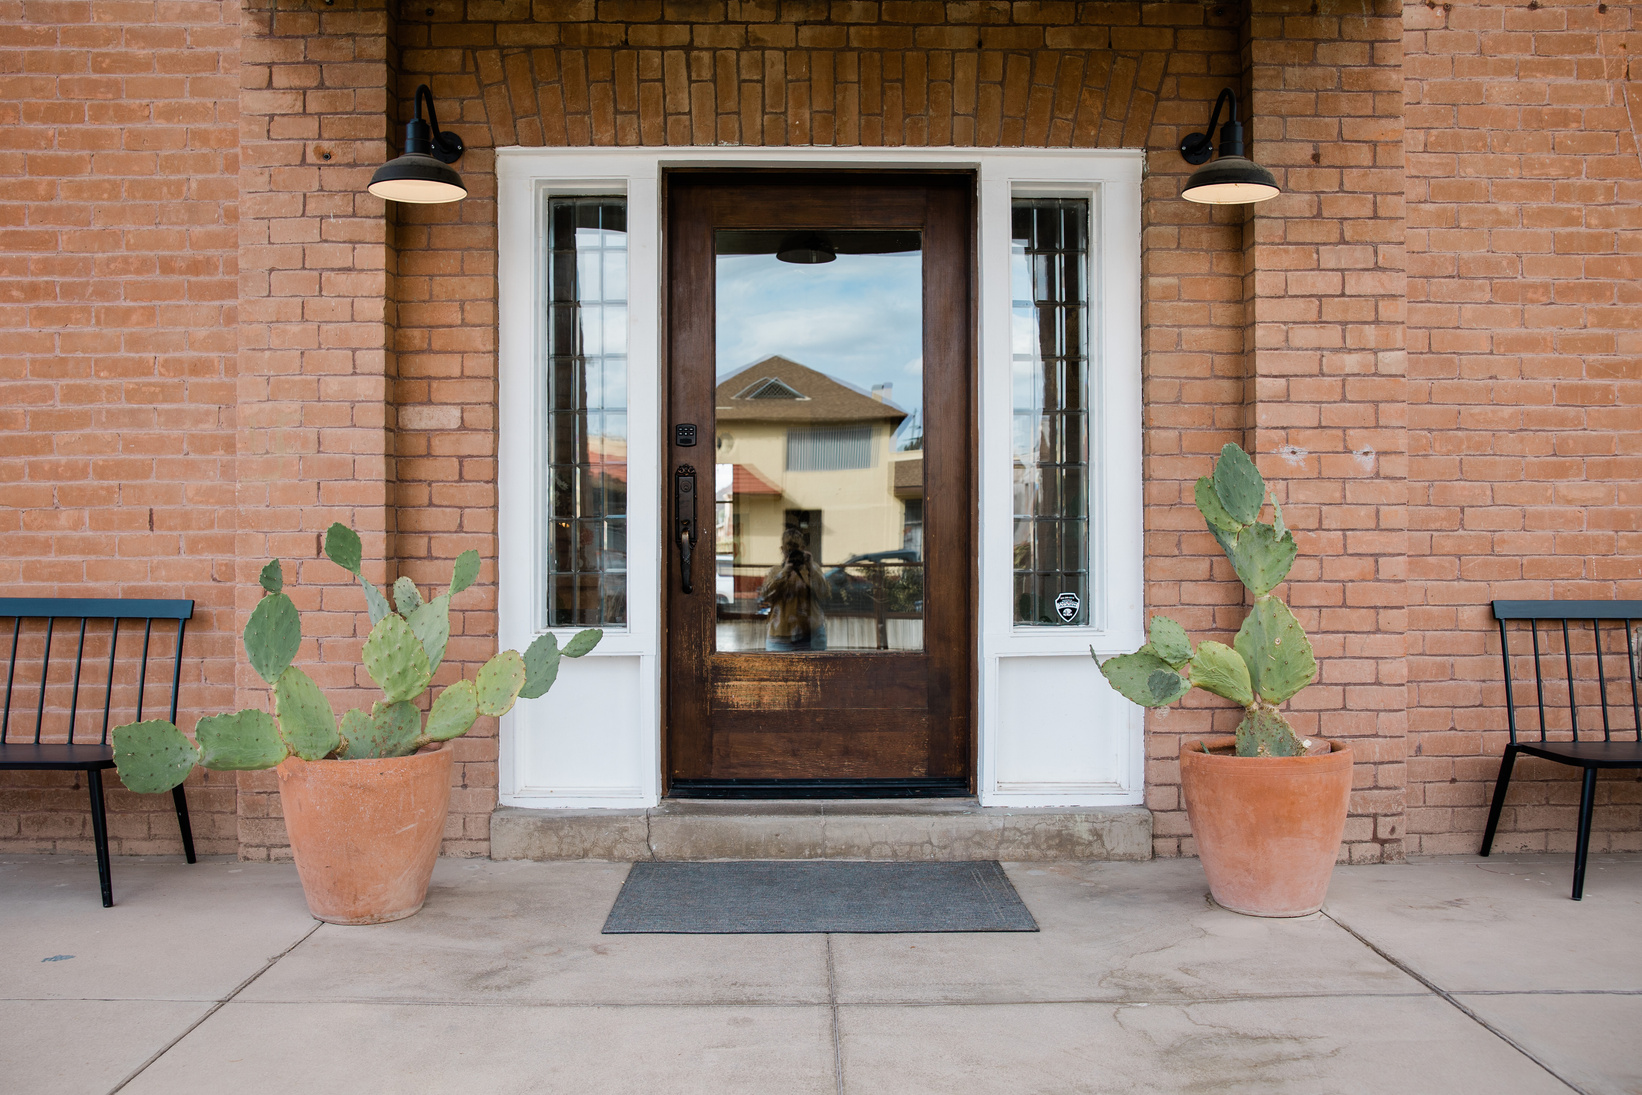 Cactus Plants by the Door of a House